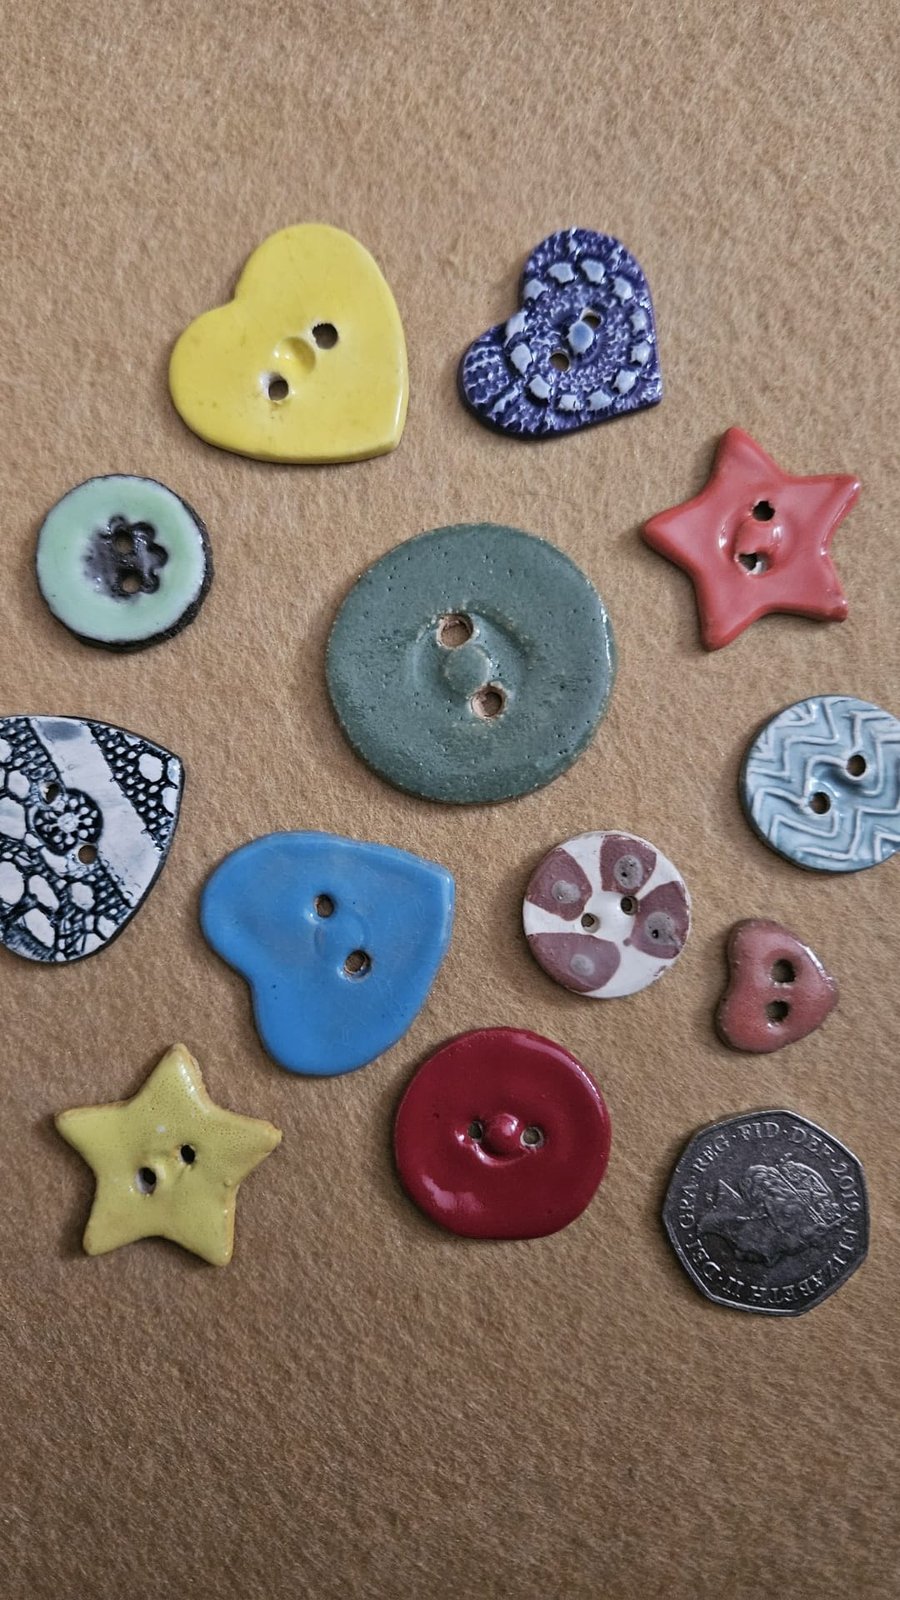 A Bargain Selection of Twelve Ceramic Buttons